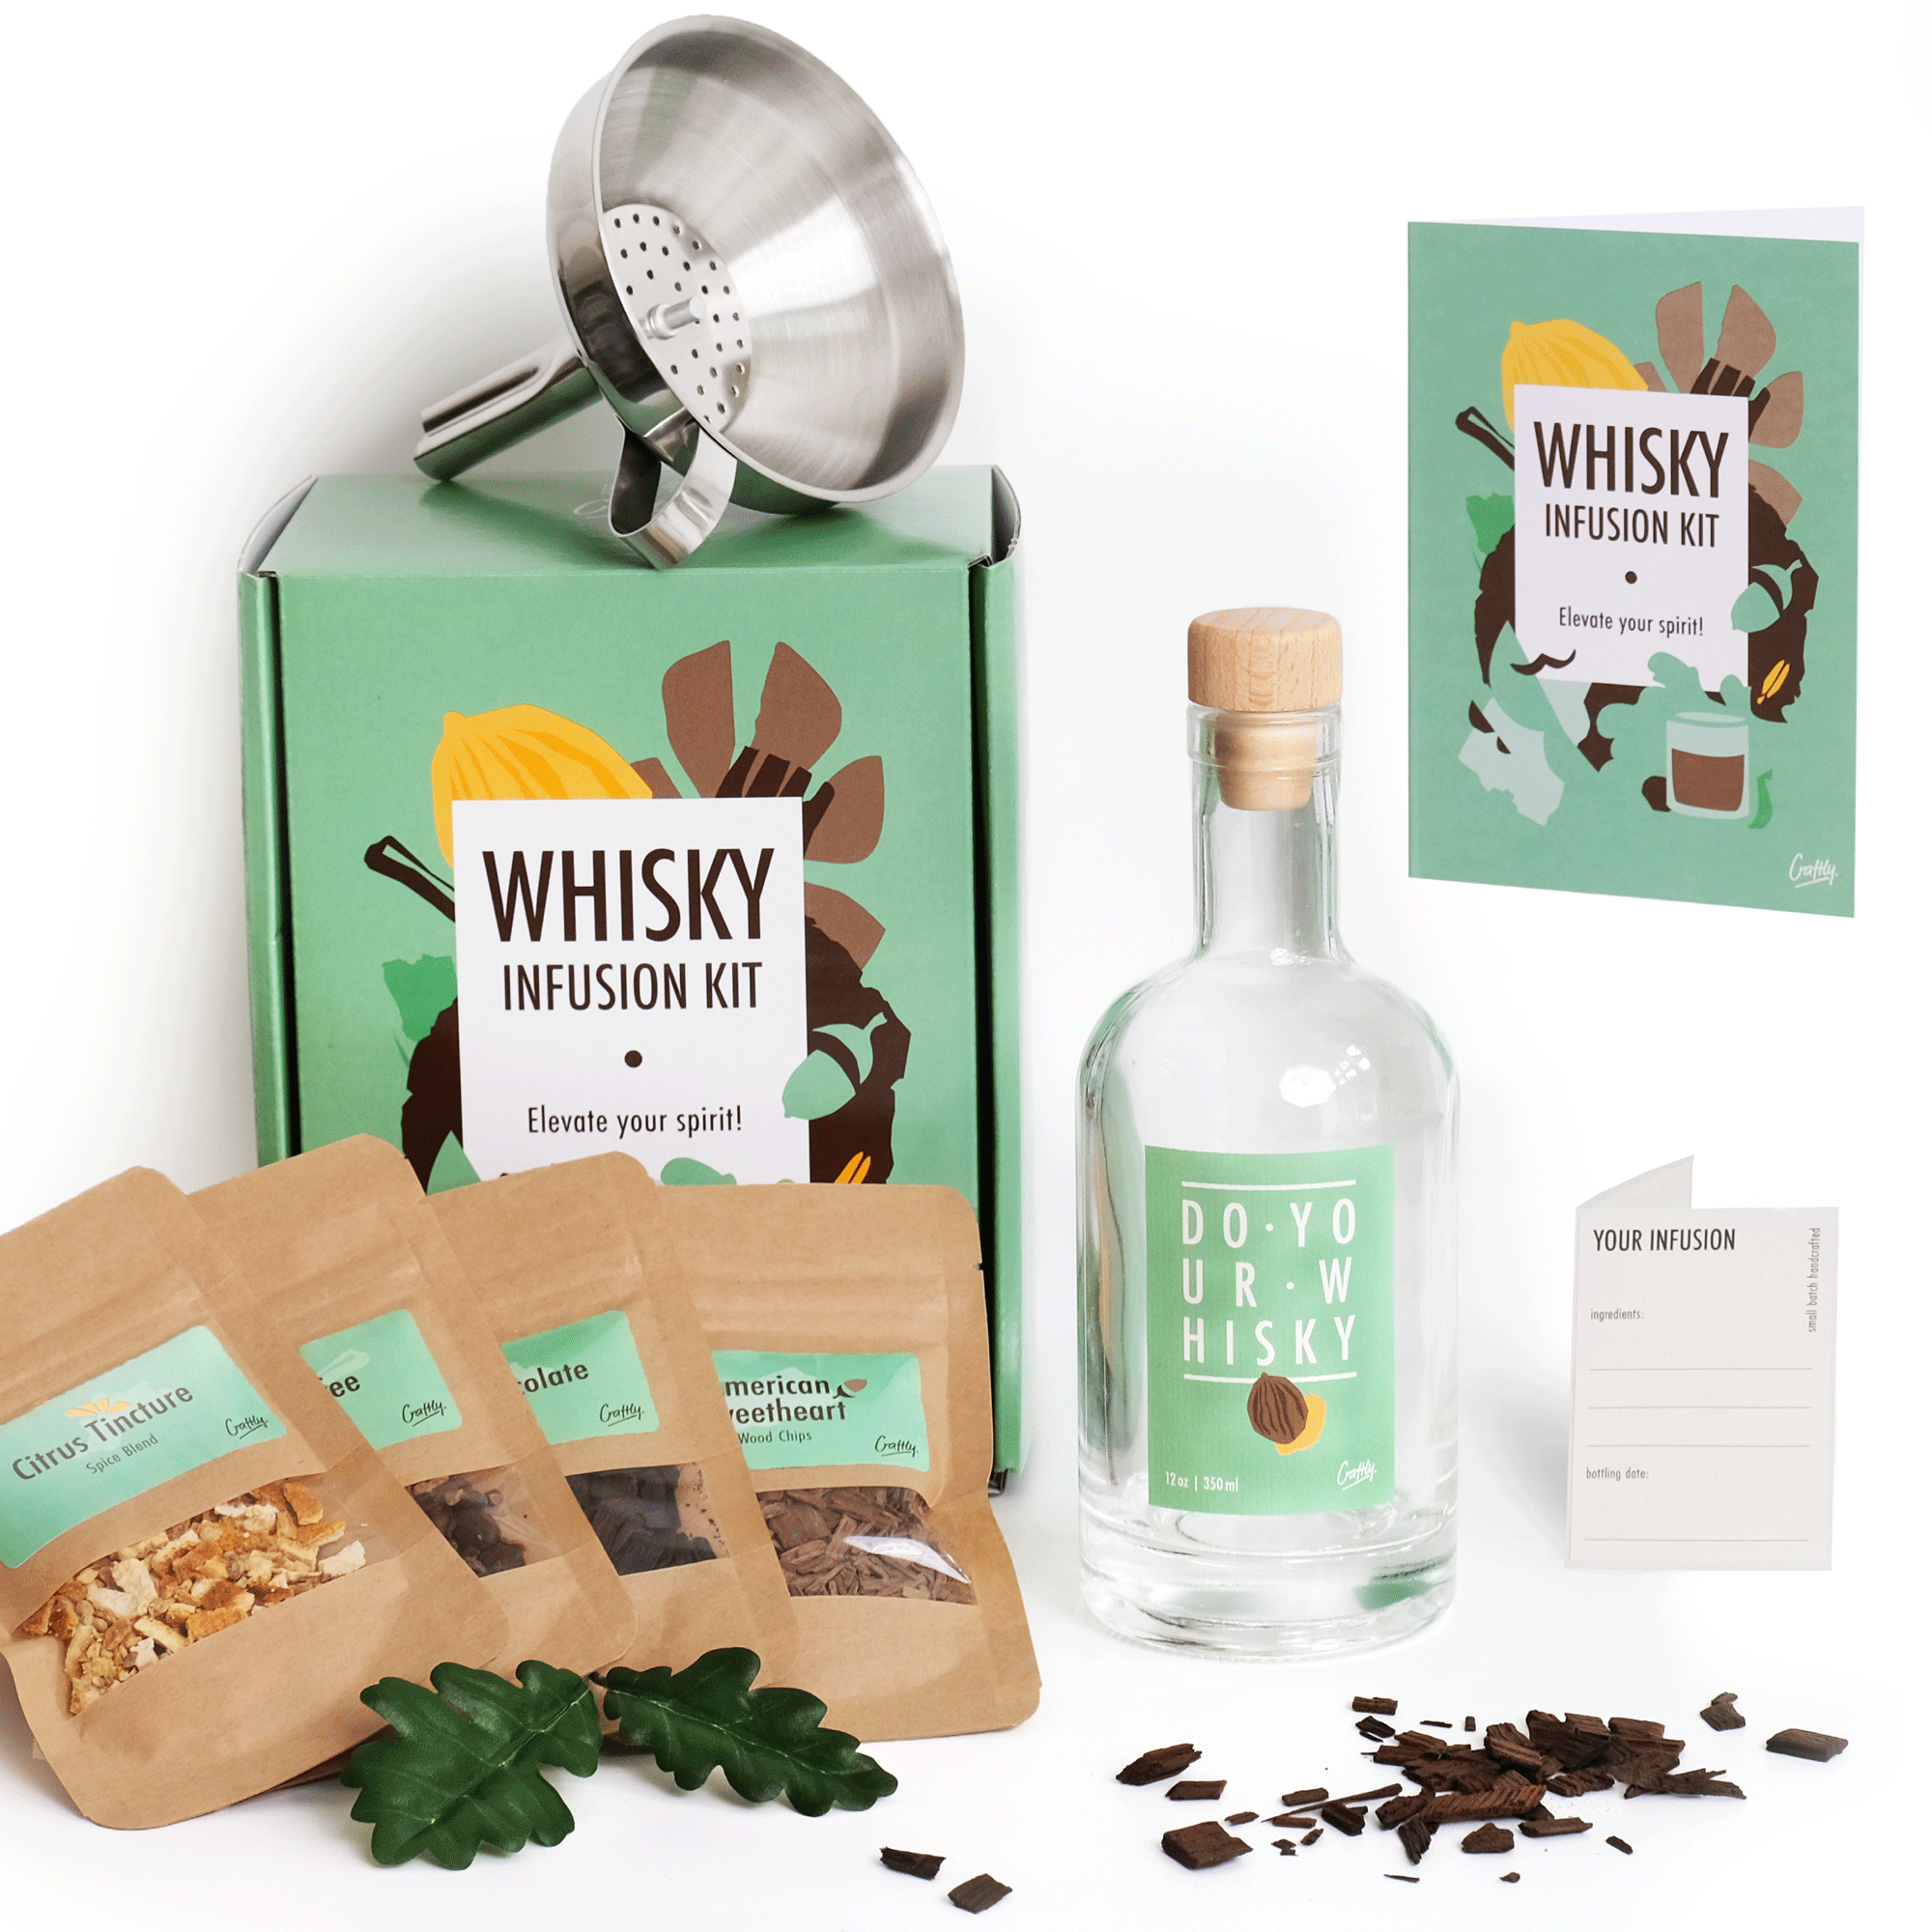 DO Your Whisky Infusion, DIY Kit for Homemade Whisky Flavor